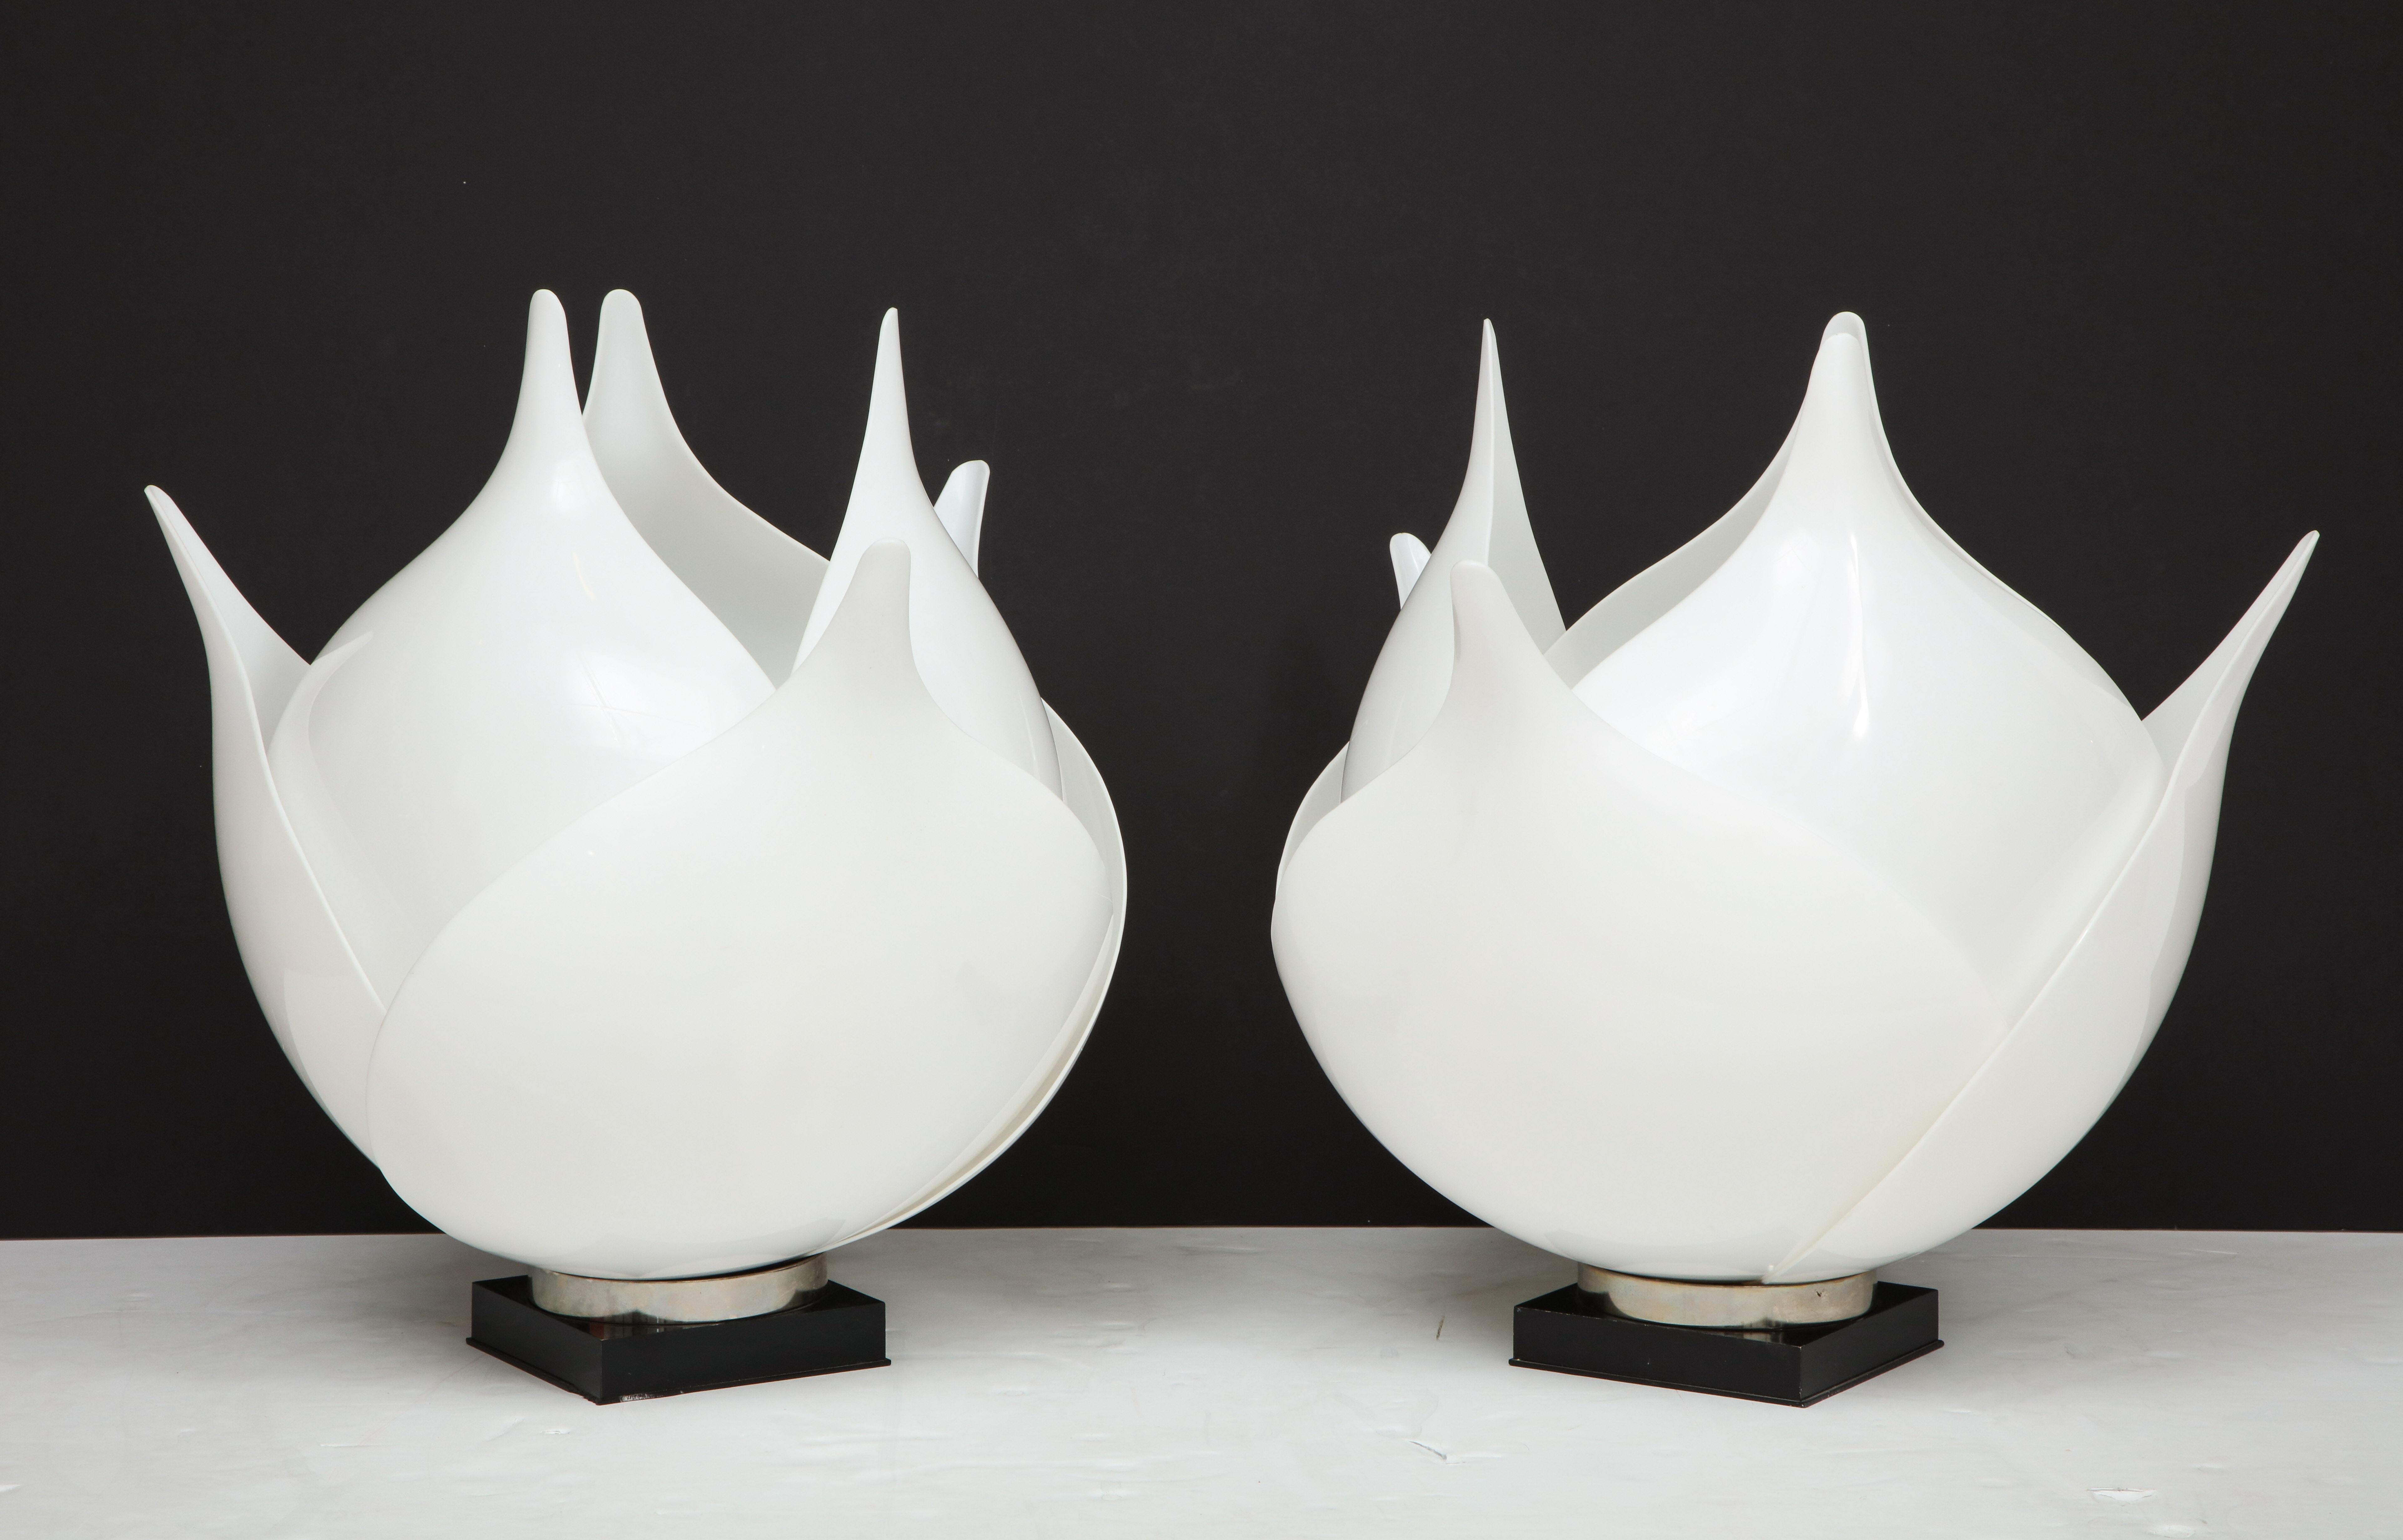 A stunning large pair of 1980s acrylic lamps by Rougier.
The lamps have 6 large petals which resemble Artichoke leaves and they
have been newly rewired.
There are a couple of minimal repairs which are not noticeable on the inner petal.